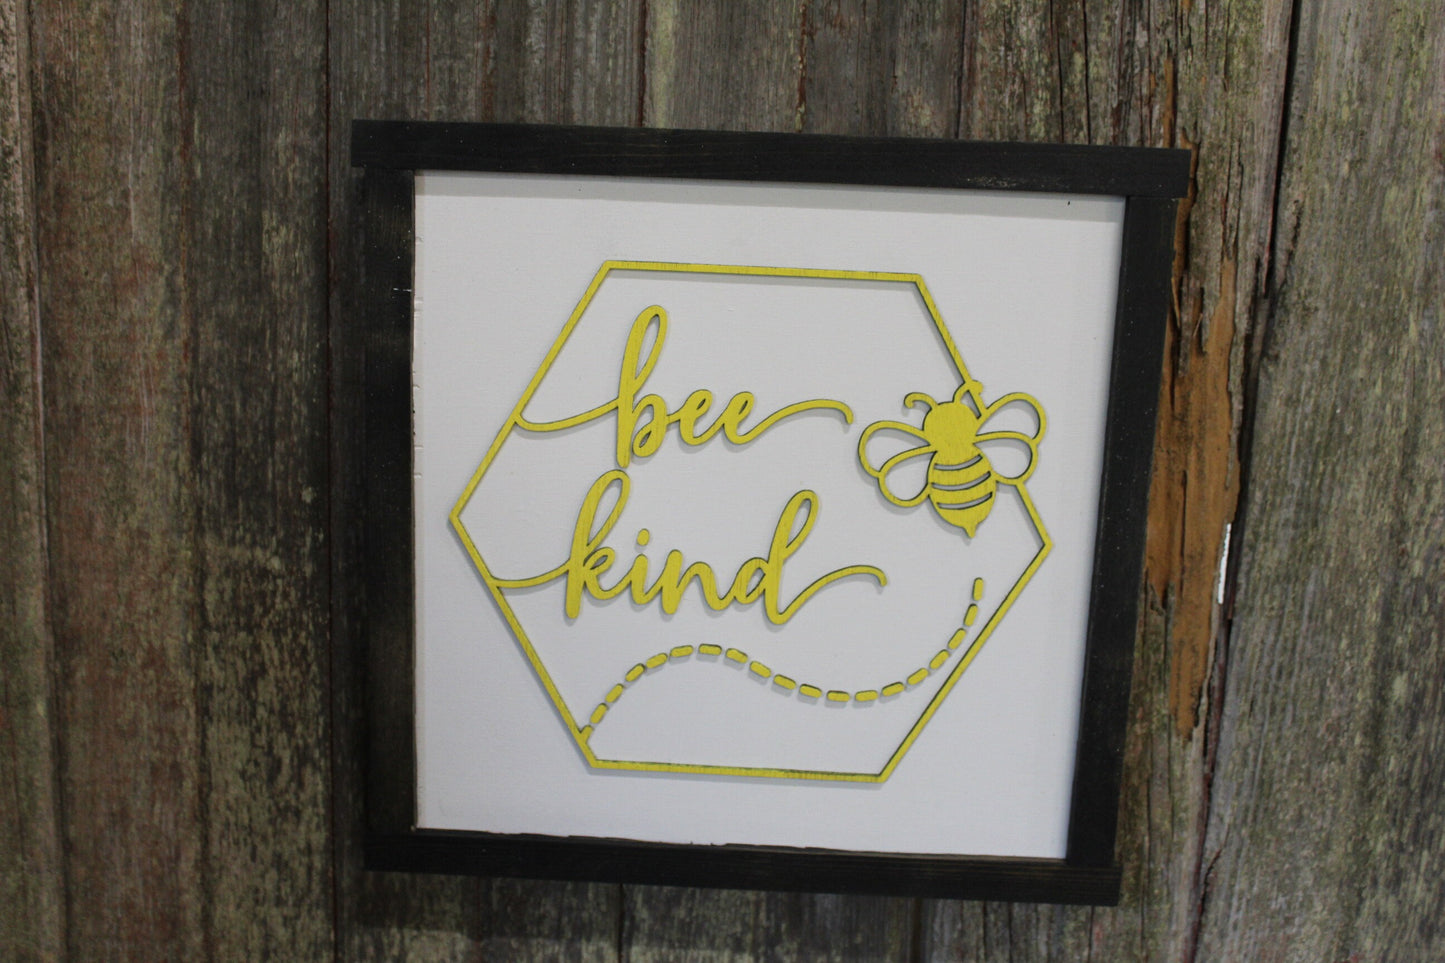 Bee Kind Wood Sign Honey Comb Queen Bee 3D Raised Text Bumble Bee Wreath Rustic Honey Bee Hive Farmhouse Country Yellow Wall Hanging Art